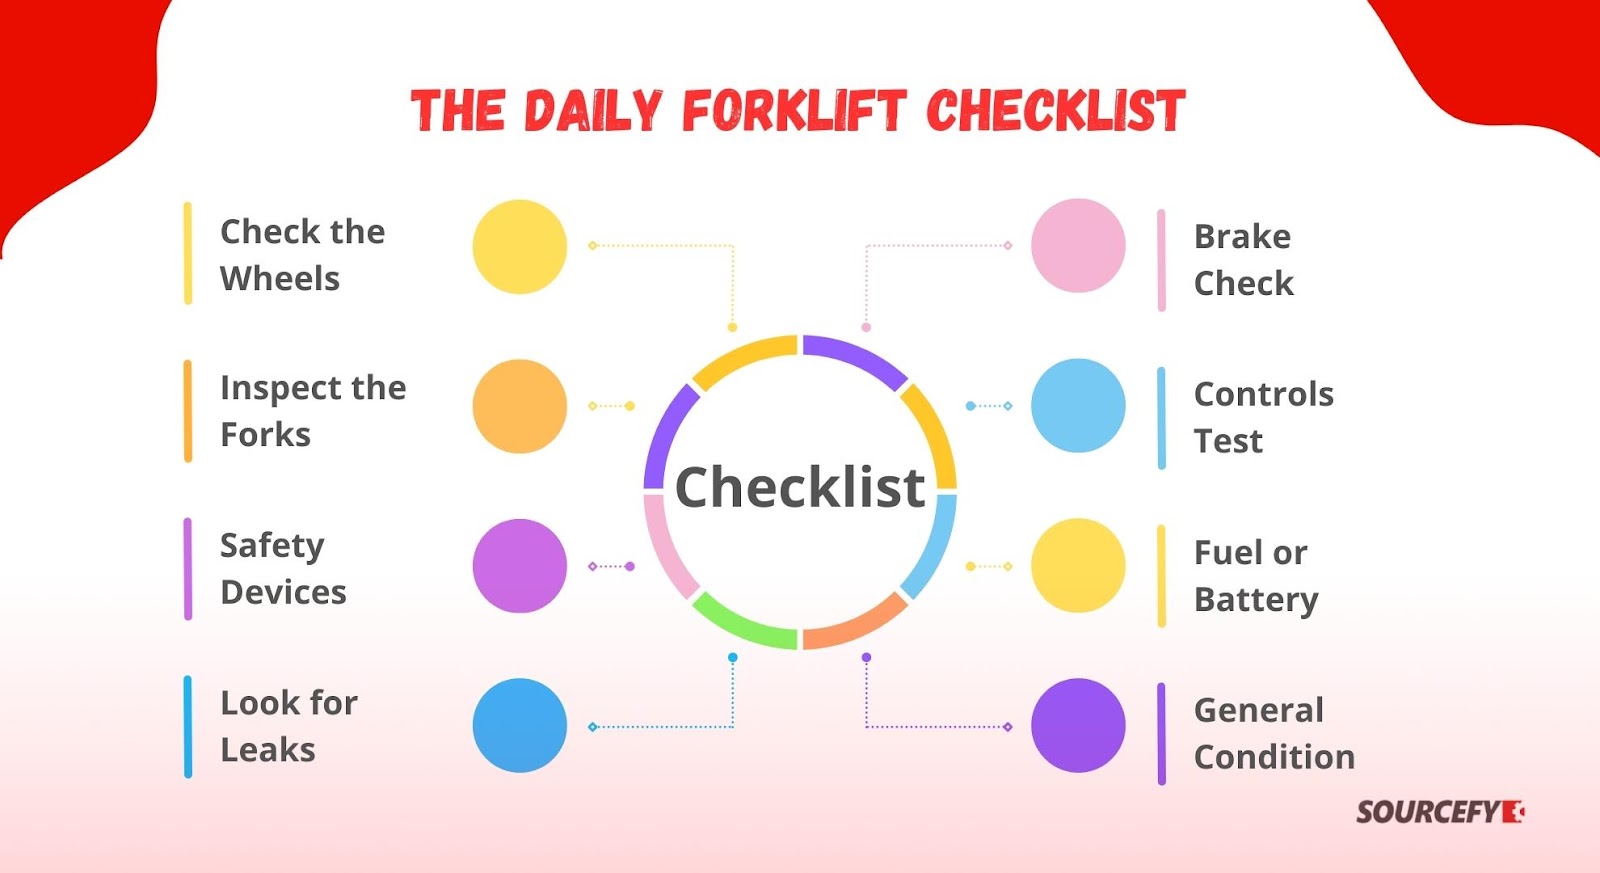 The Daily Forklift Checklist